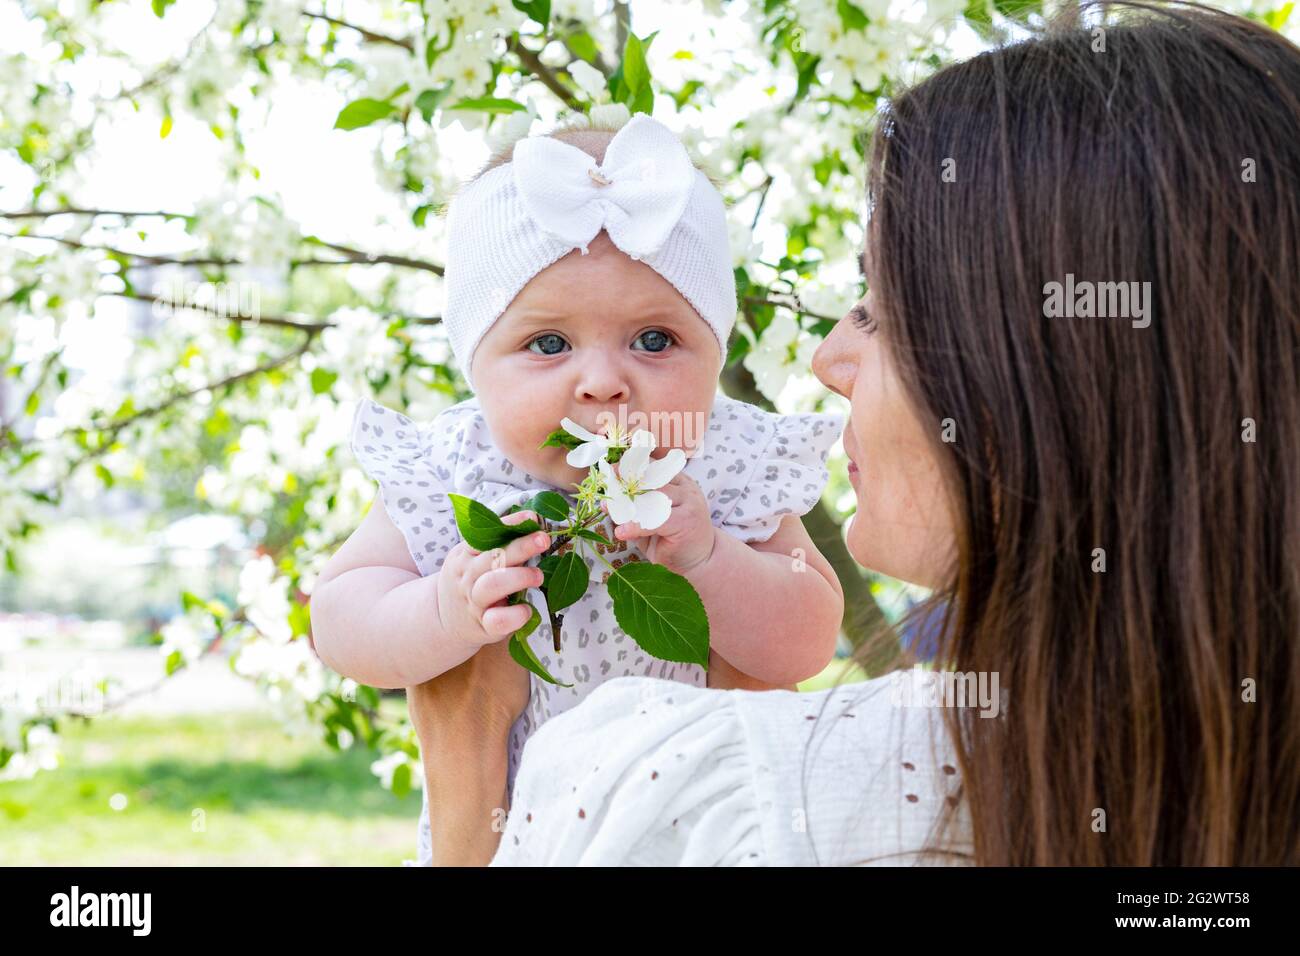 Happy family lifestyle photography. Smiling brunette mom and her little daughter in a blooming spring garden. Happy childhood and motherhood concept. Stock Photo